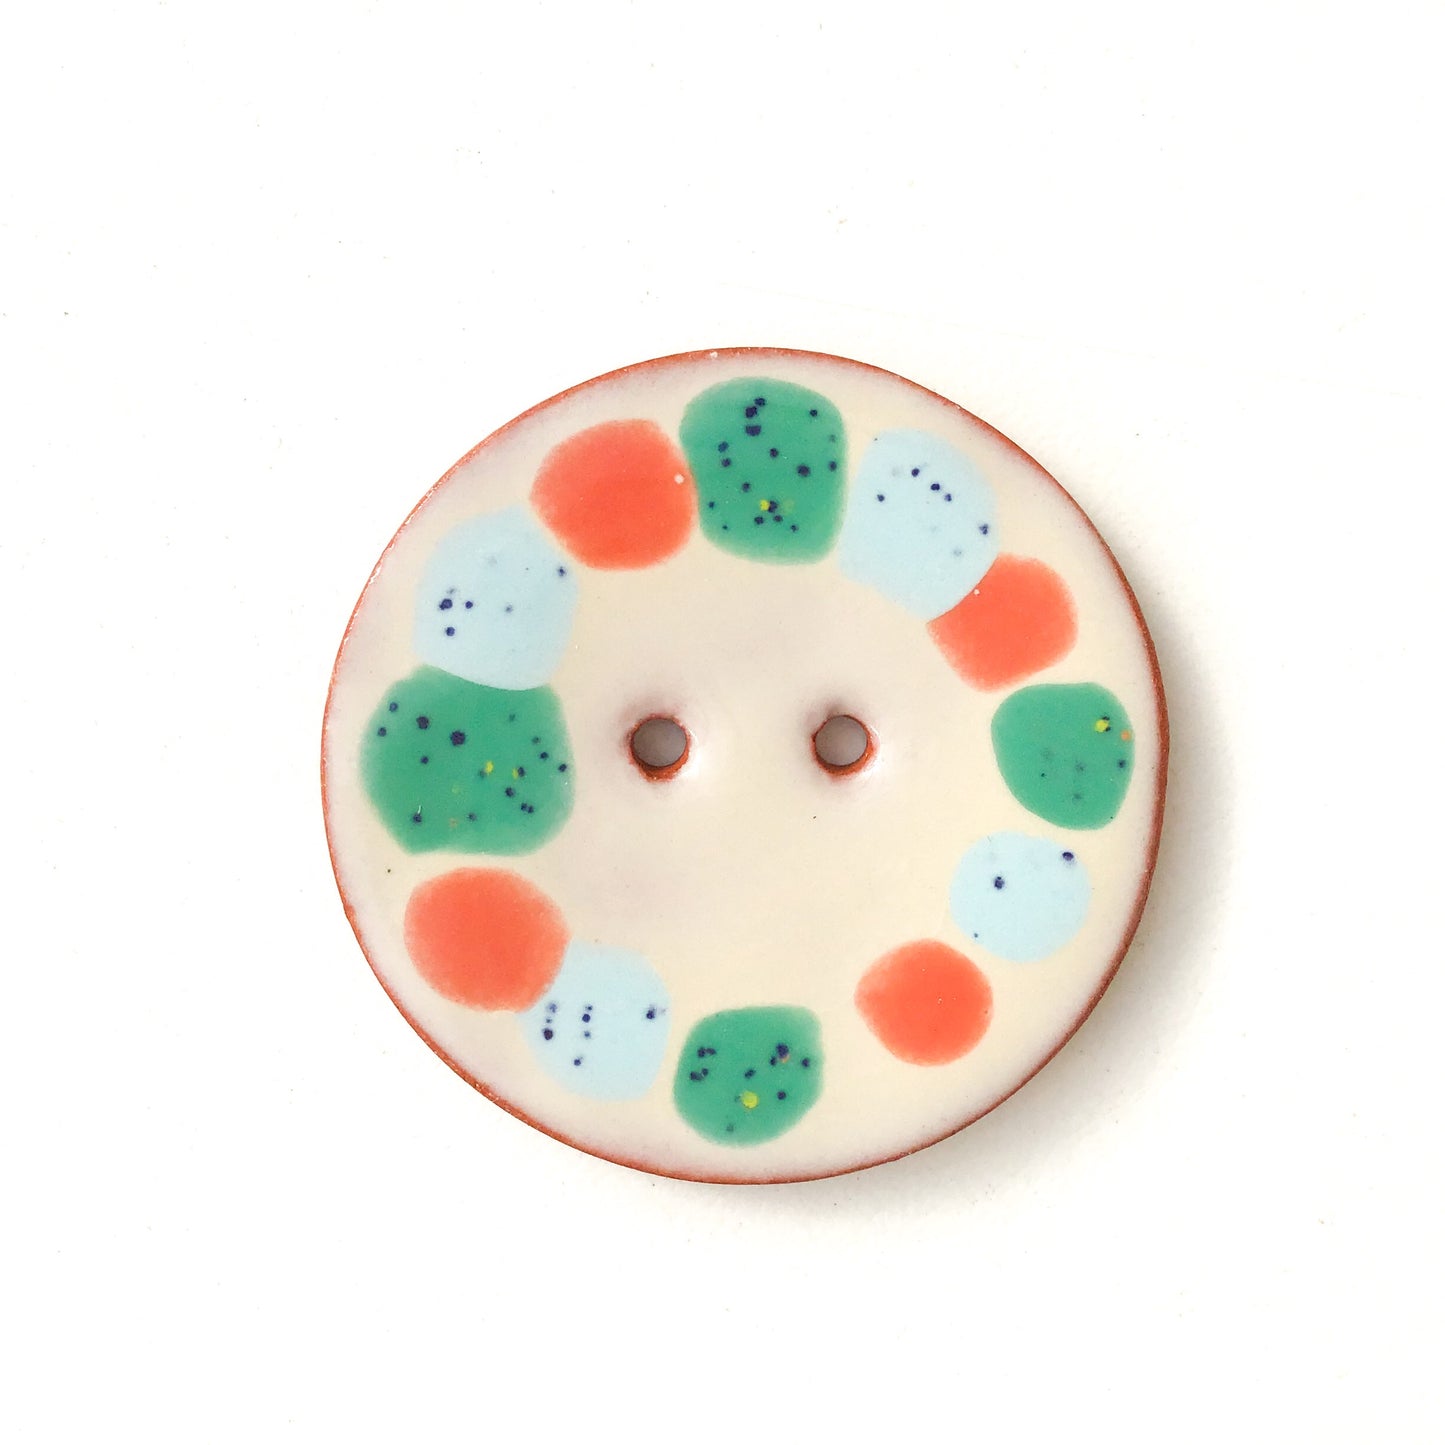 Colorful Dotted Buttons - Color Contrast Ceramic Buttons - 1 3/8" (ws-52)